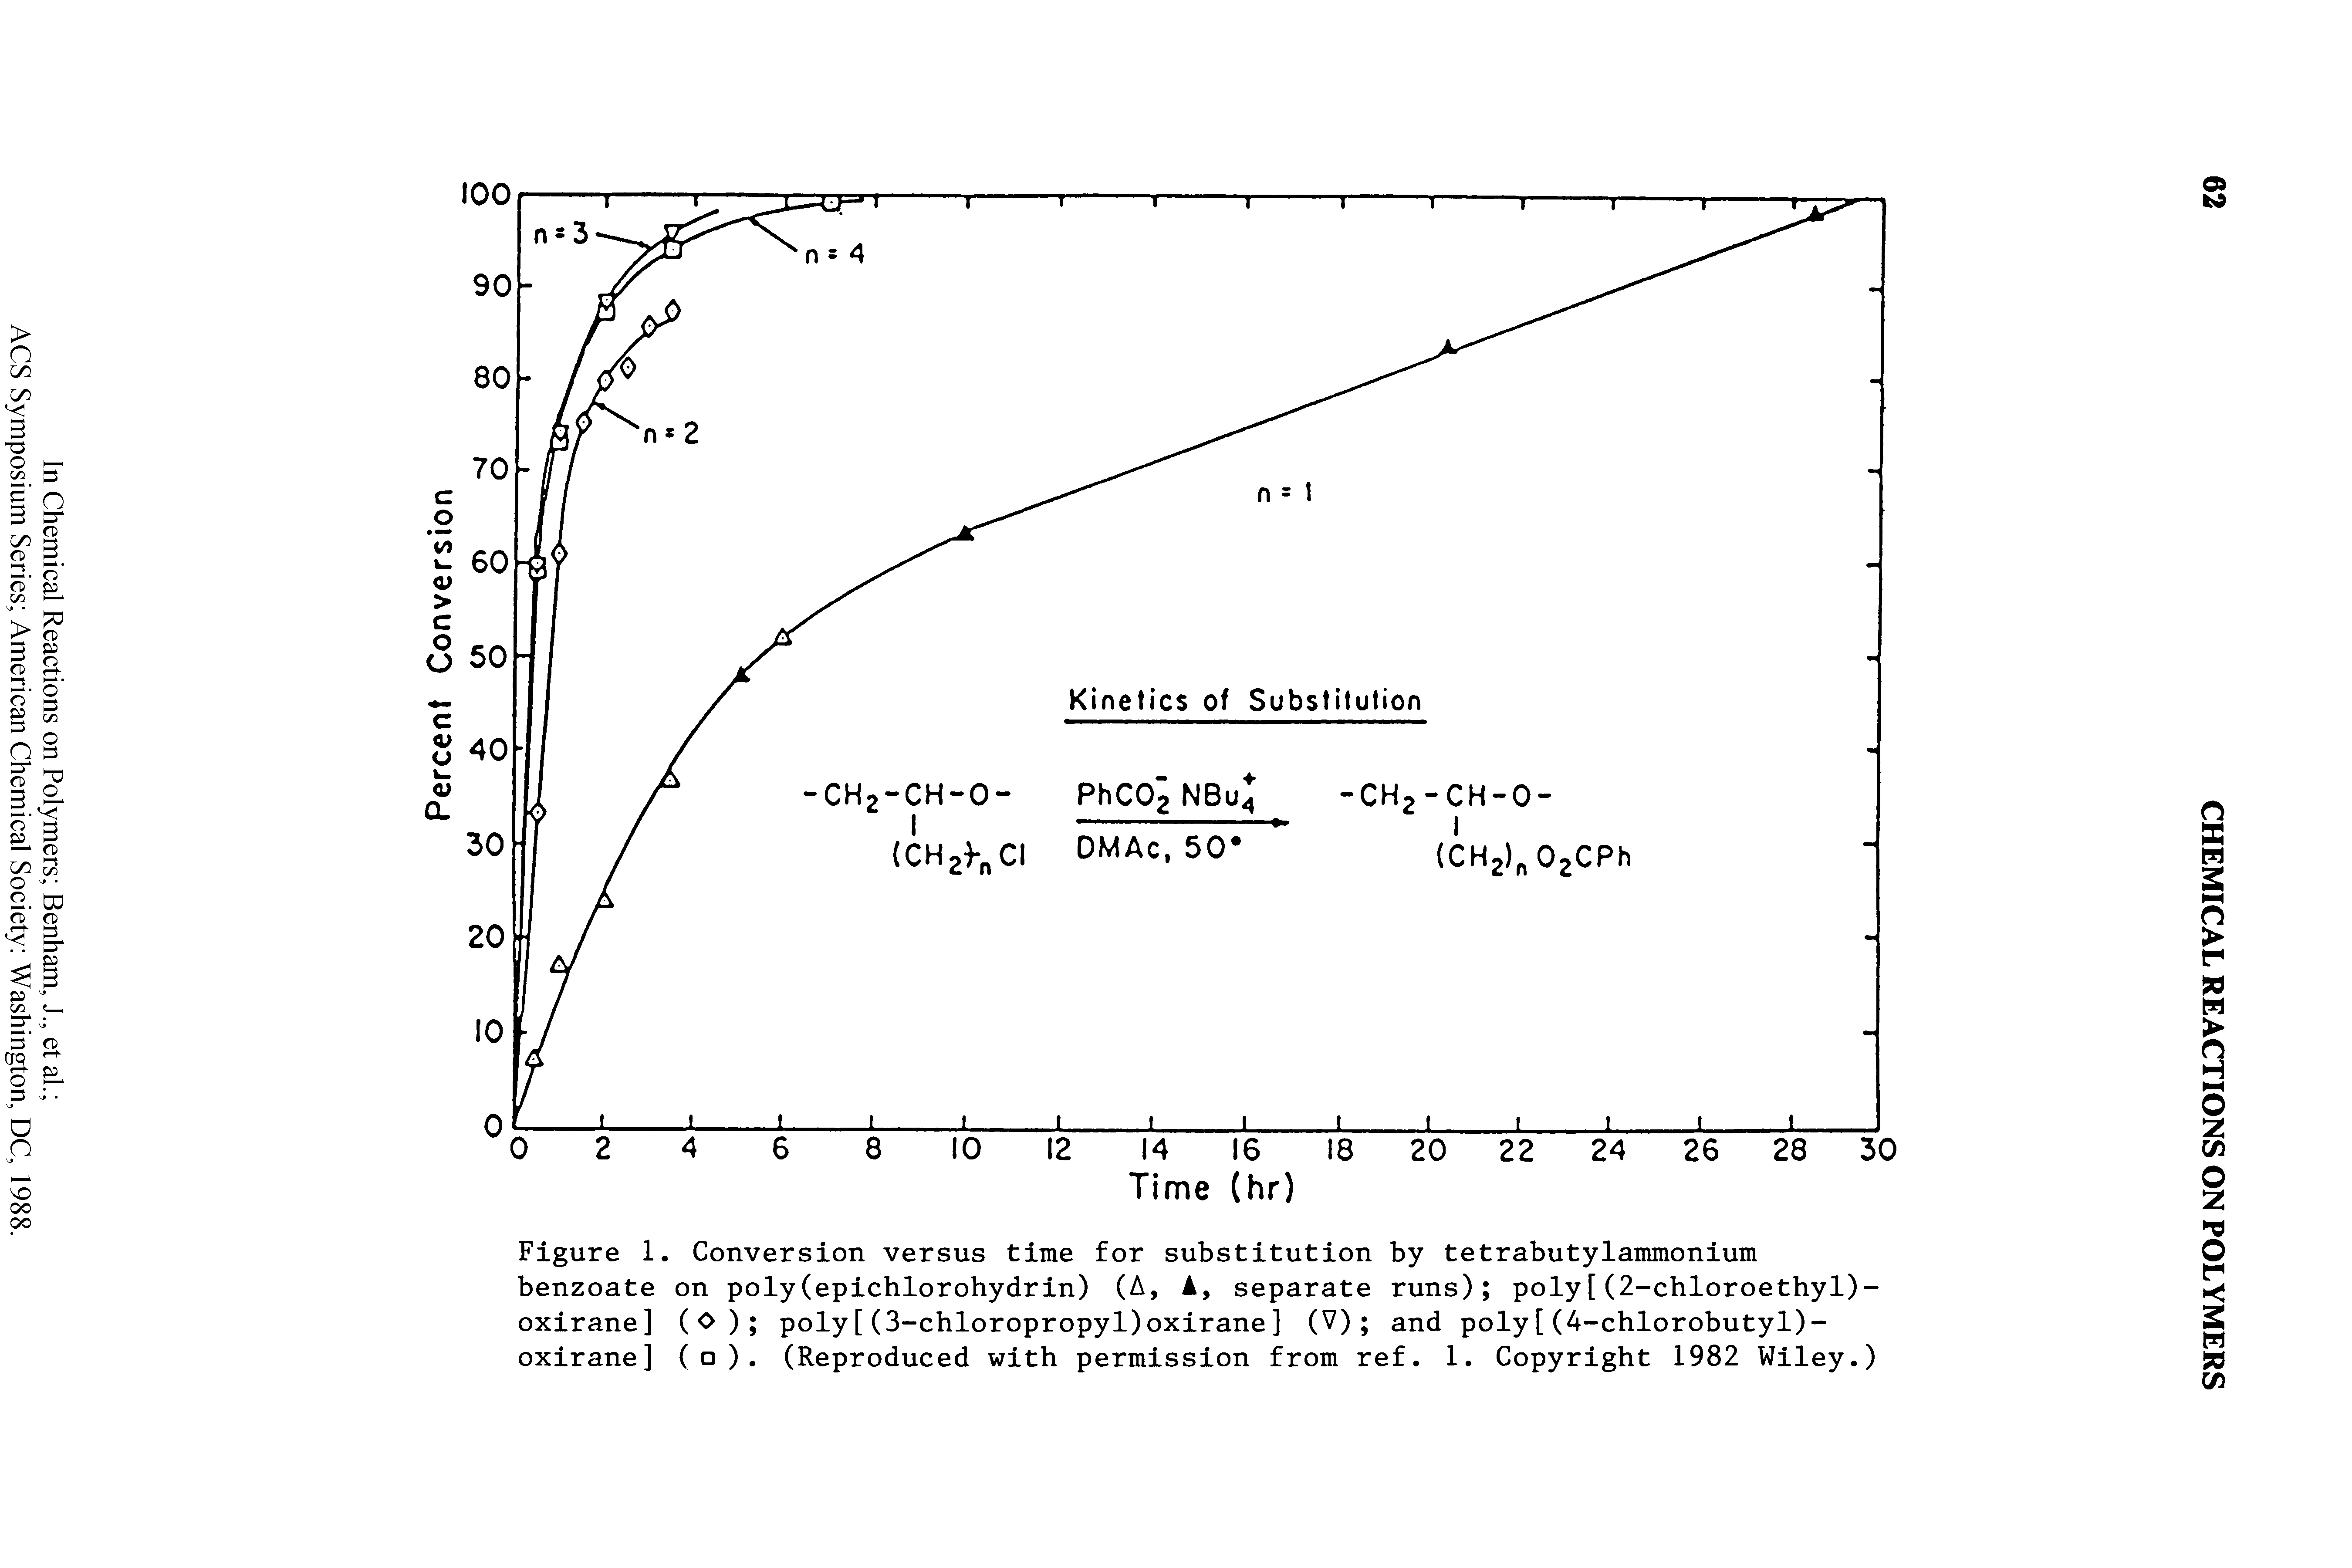 Figure 1. Conversion versus time for substitution by tetrabutylammonium benzoate on poly(epichlorohydrin) (A, A, separate runs) poly[(2-chloroethyl)-oxirane] (O) poly[(3-chloropropyl)oxirane] (V) and poly[(4-chlorobutyl)-oxirane] ( ). (Reproduced with permission from ref. 1. Copyright 1982 Wiley.)...